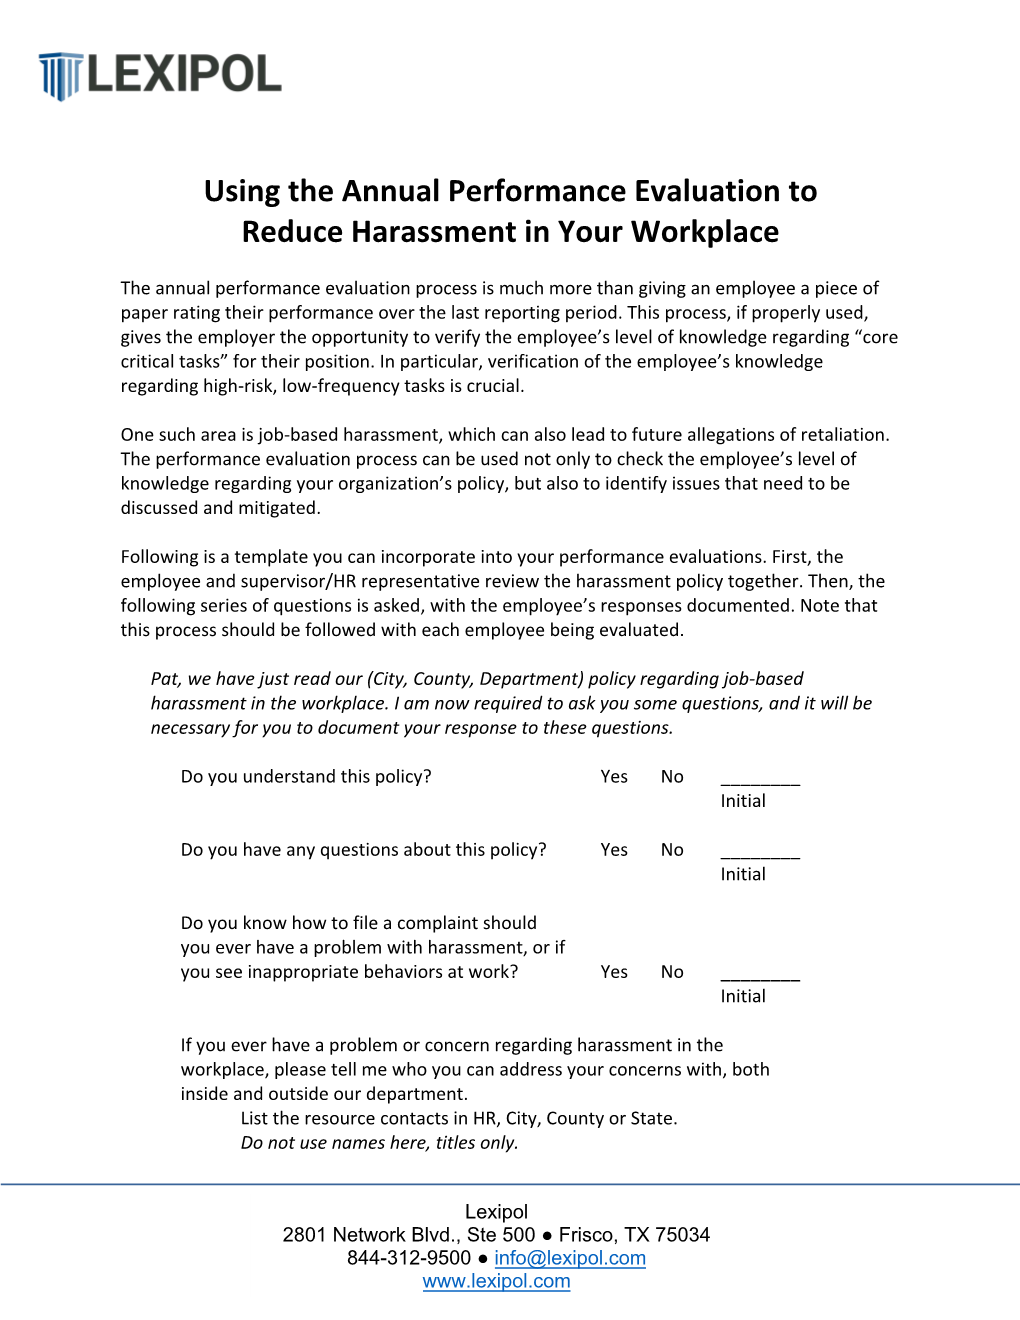 Using the Annual Performance Evaluation to Reduce Harassment in Your Workplace